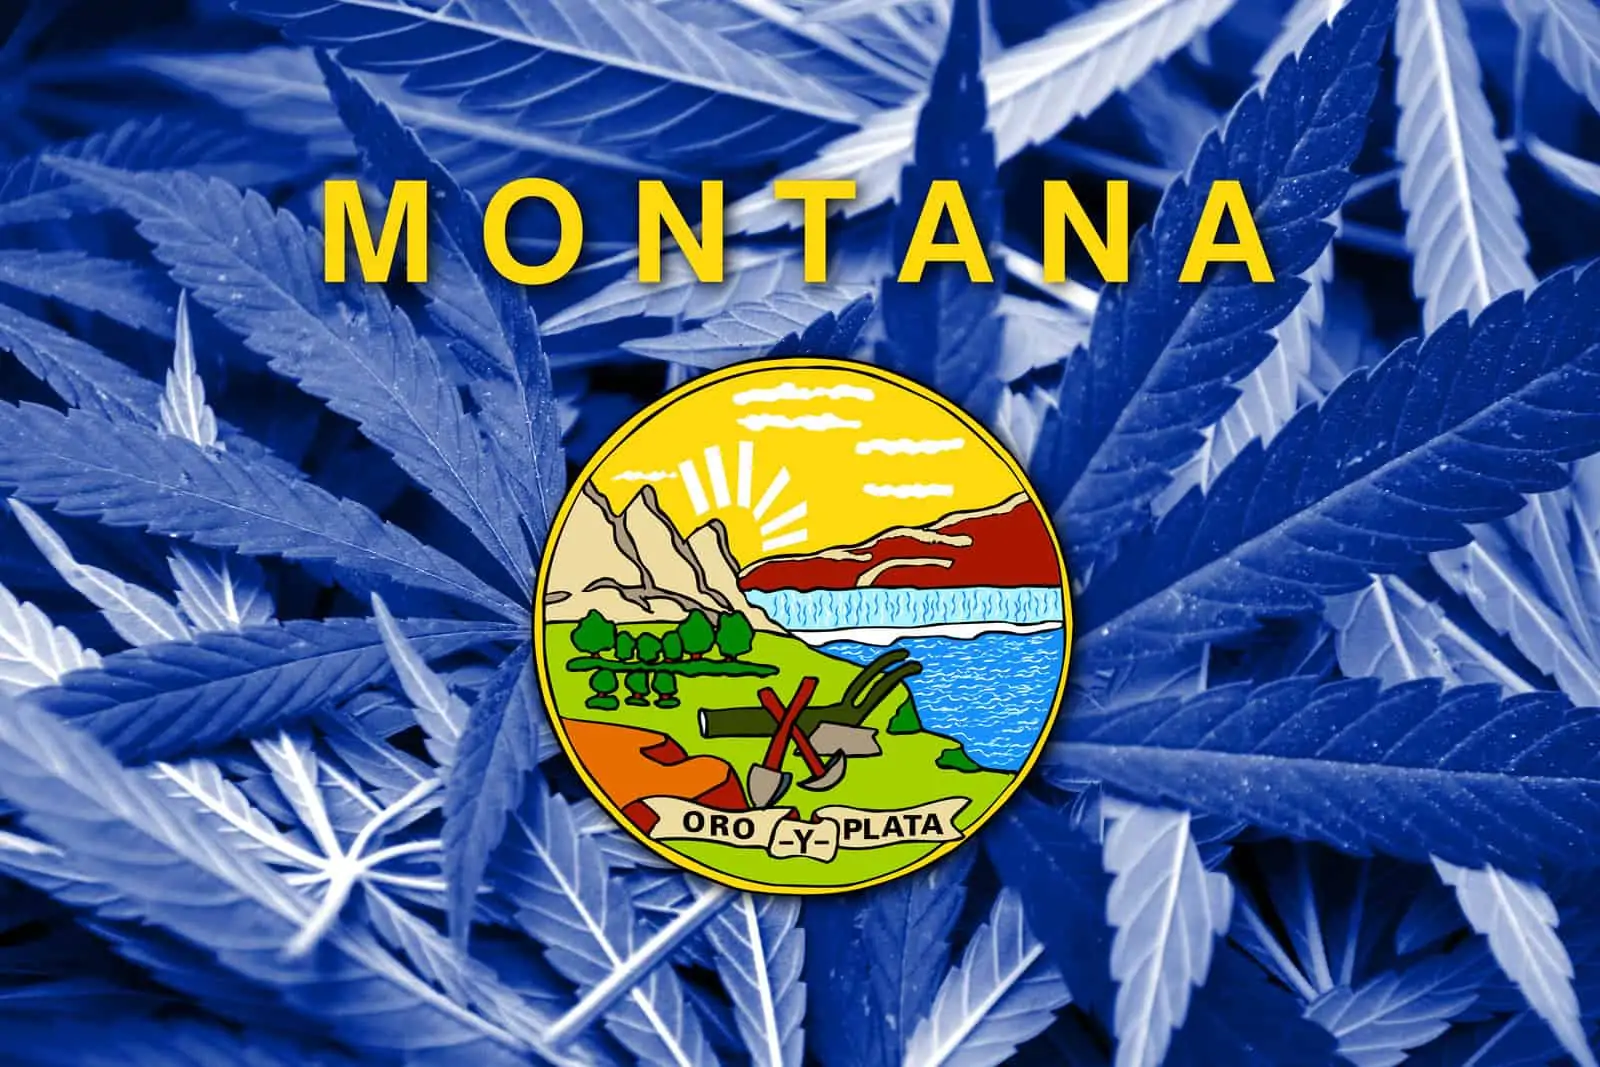 Is Cannabis Legal in Montana? Montana state sign.